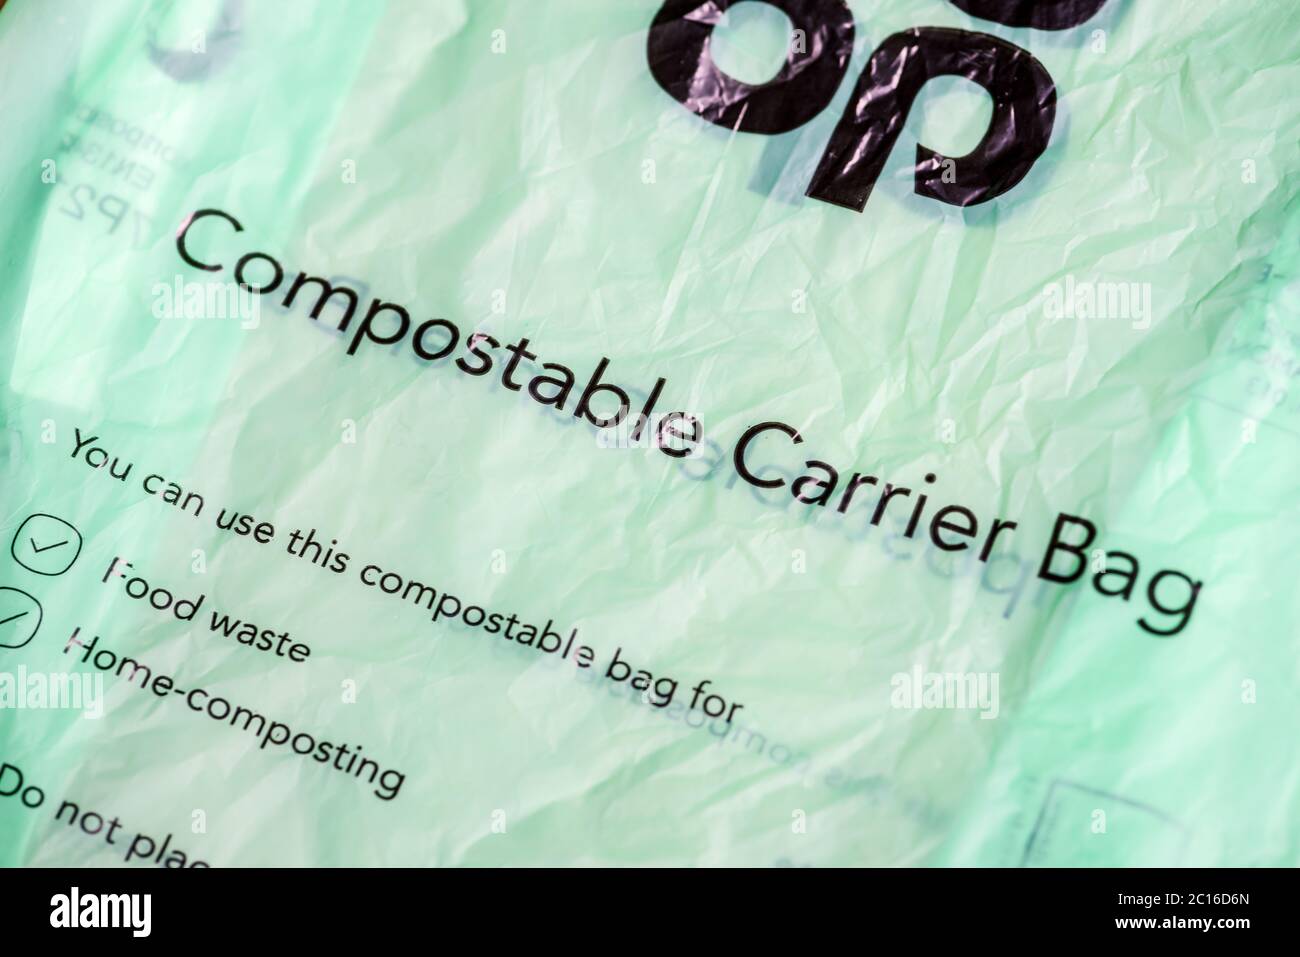 https://c8.alamy.com/comp/2C16D6N/compostable-carrier-bag-by-co-op-to-use-at-home-for-food-waste-and-home-de-composing-2C16D6N.jpg